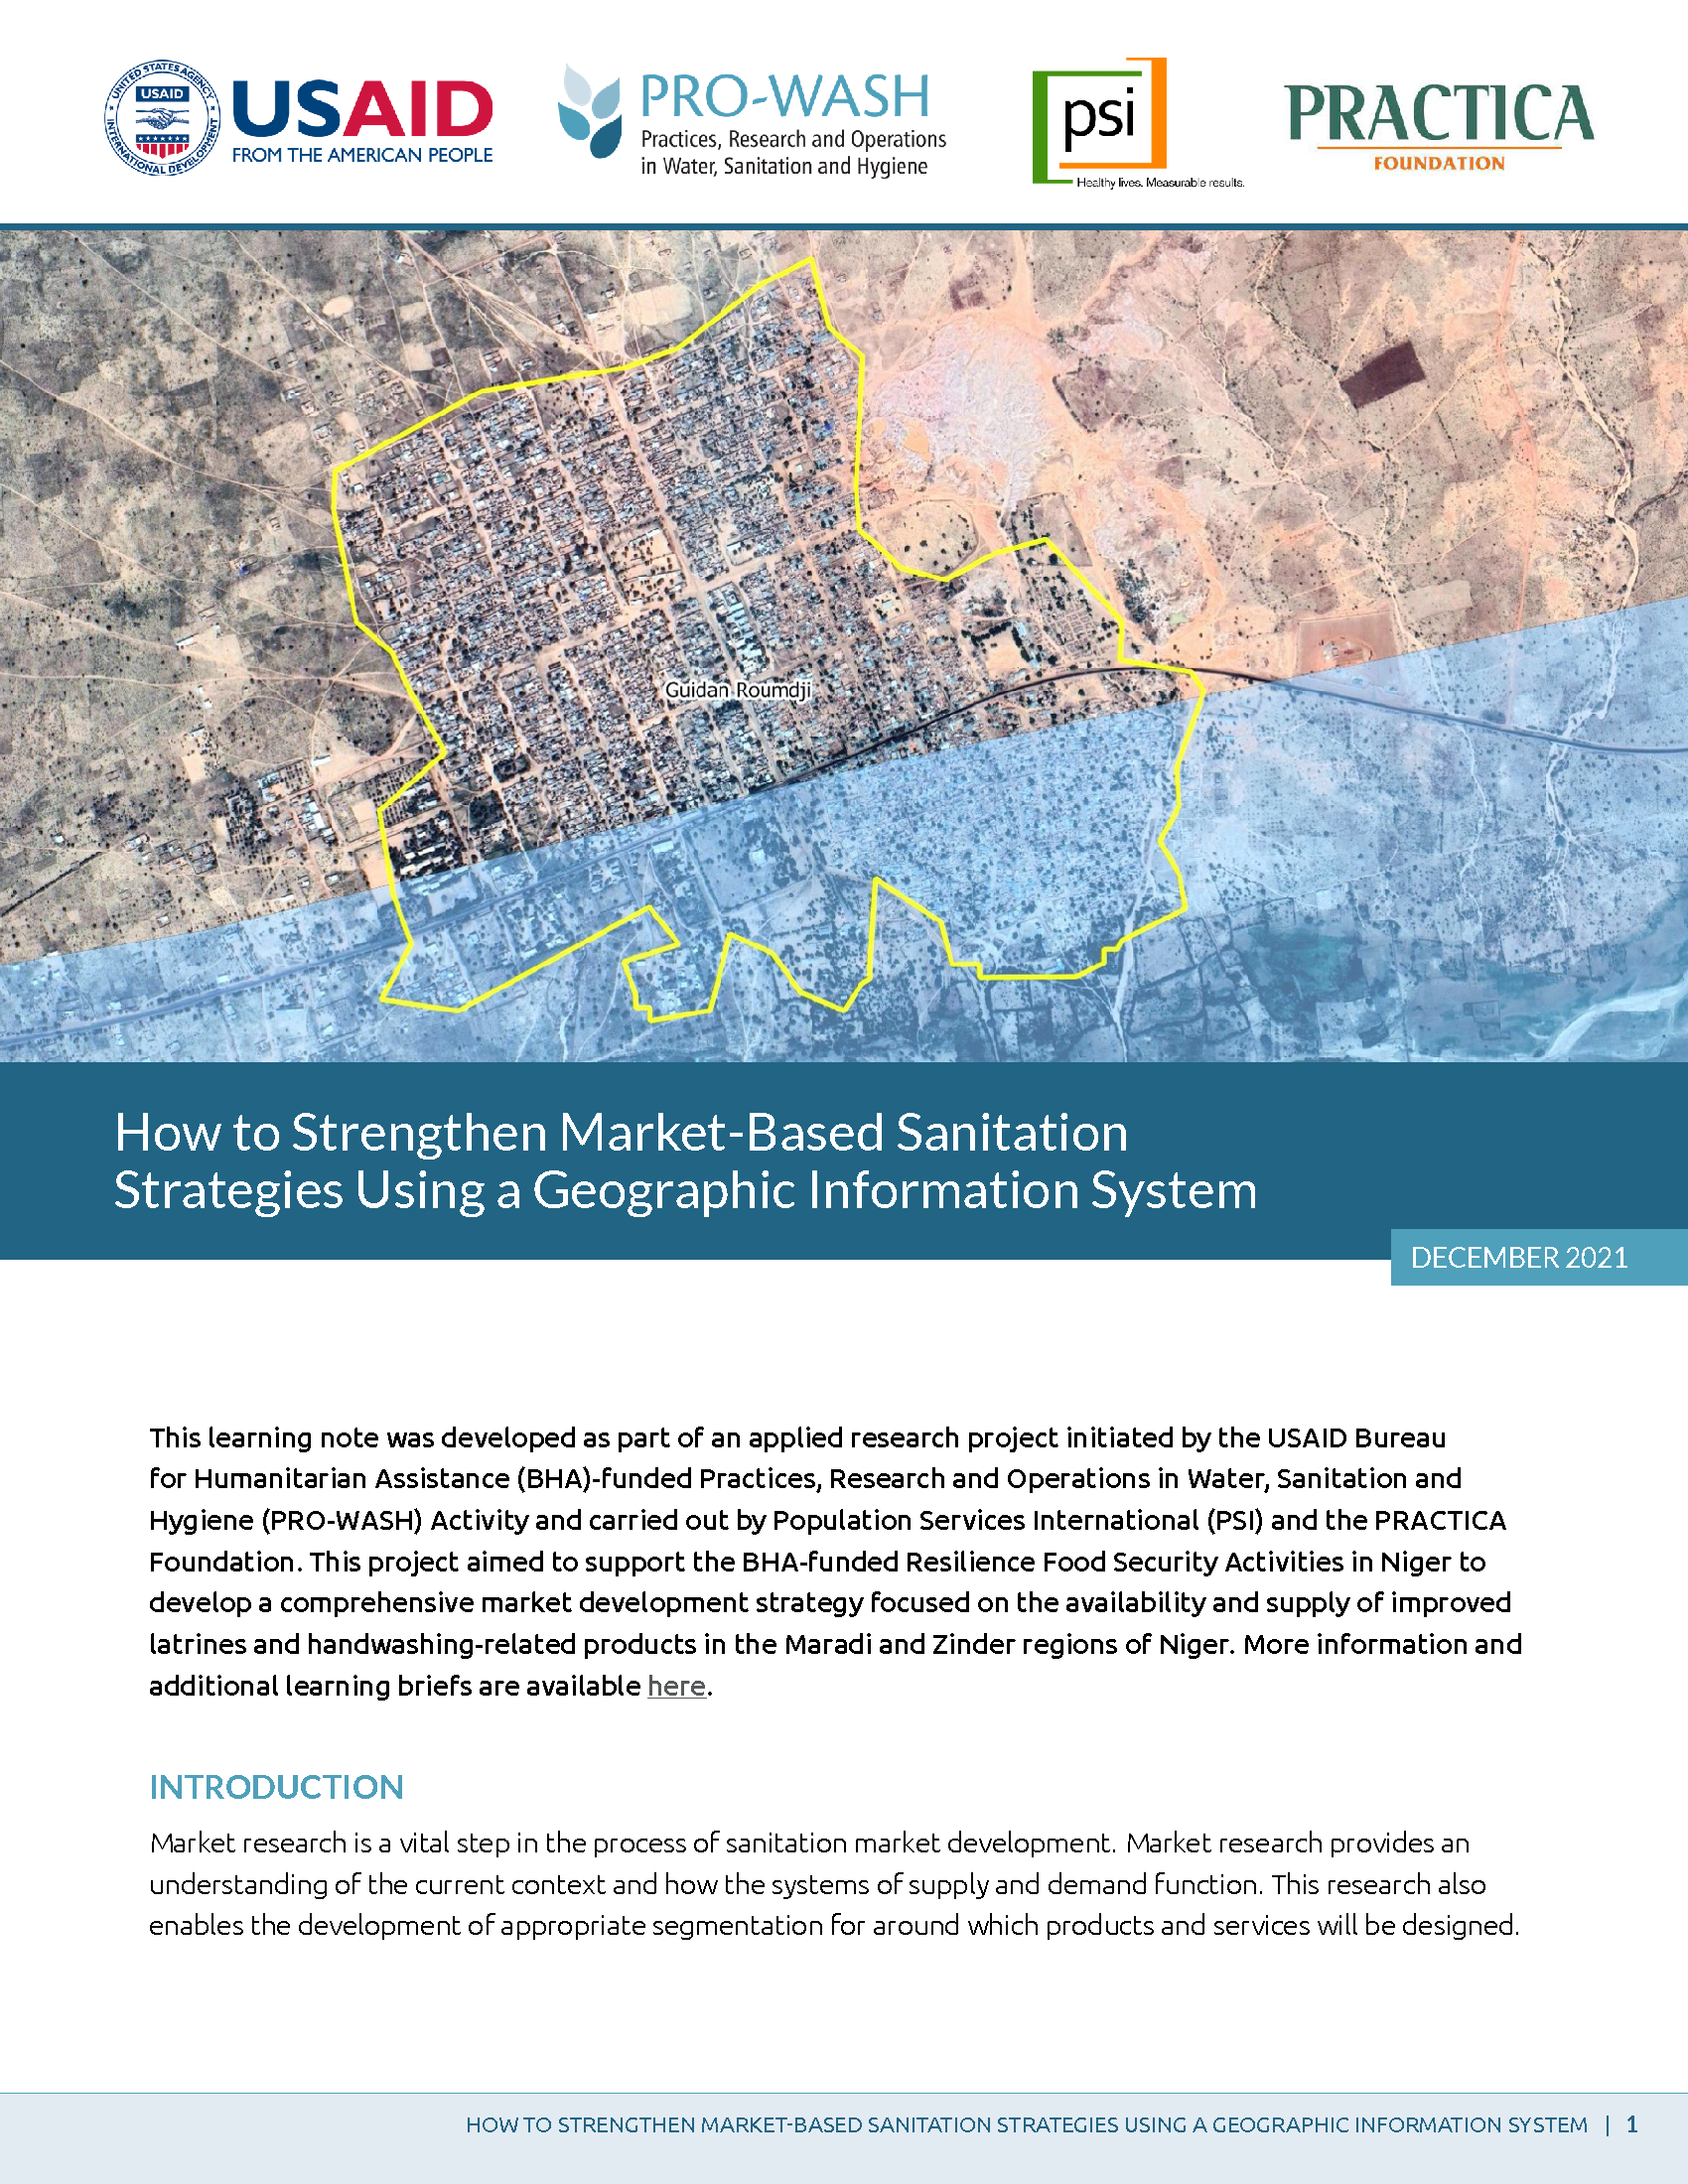 Cover page for How to Strengthen Market-Based Sanitation Strategies Using a Geographic Information System